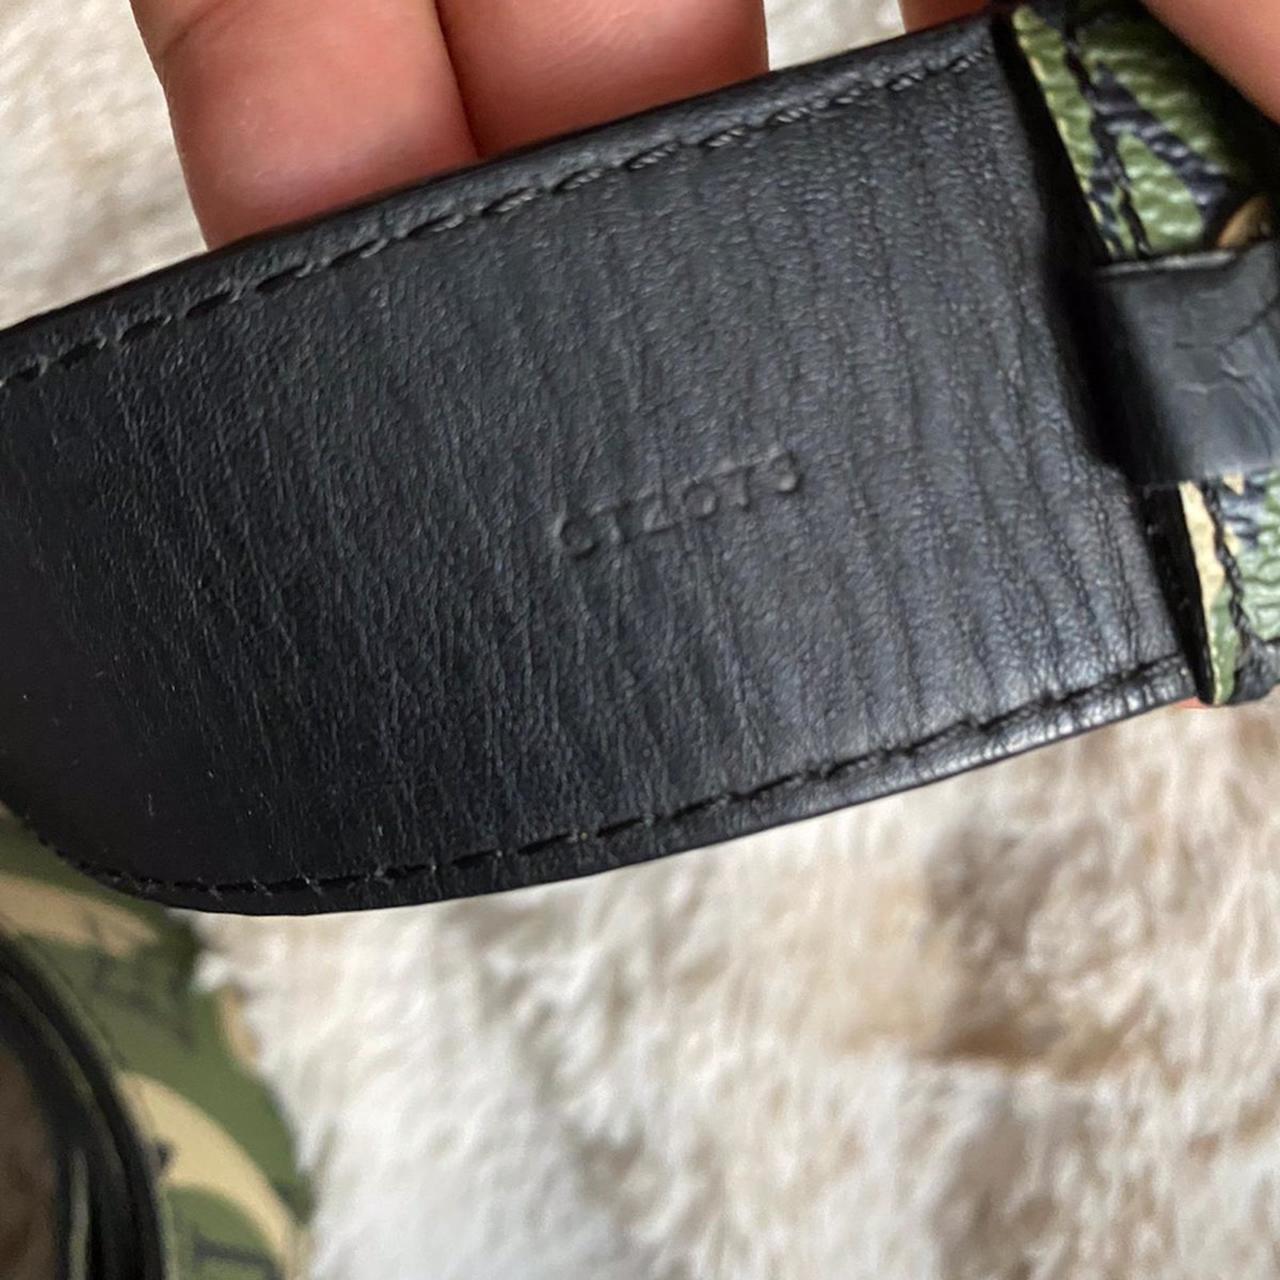 www.lukes.store on Instagram: Another Murakami Camo Lv belt. This one size  90. Kinda smoked Fr. Perfect daily driver, daily flexer if you will.